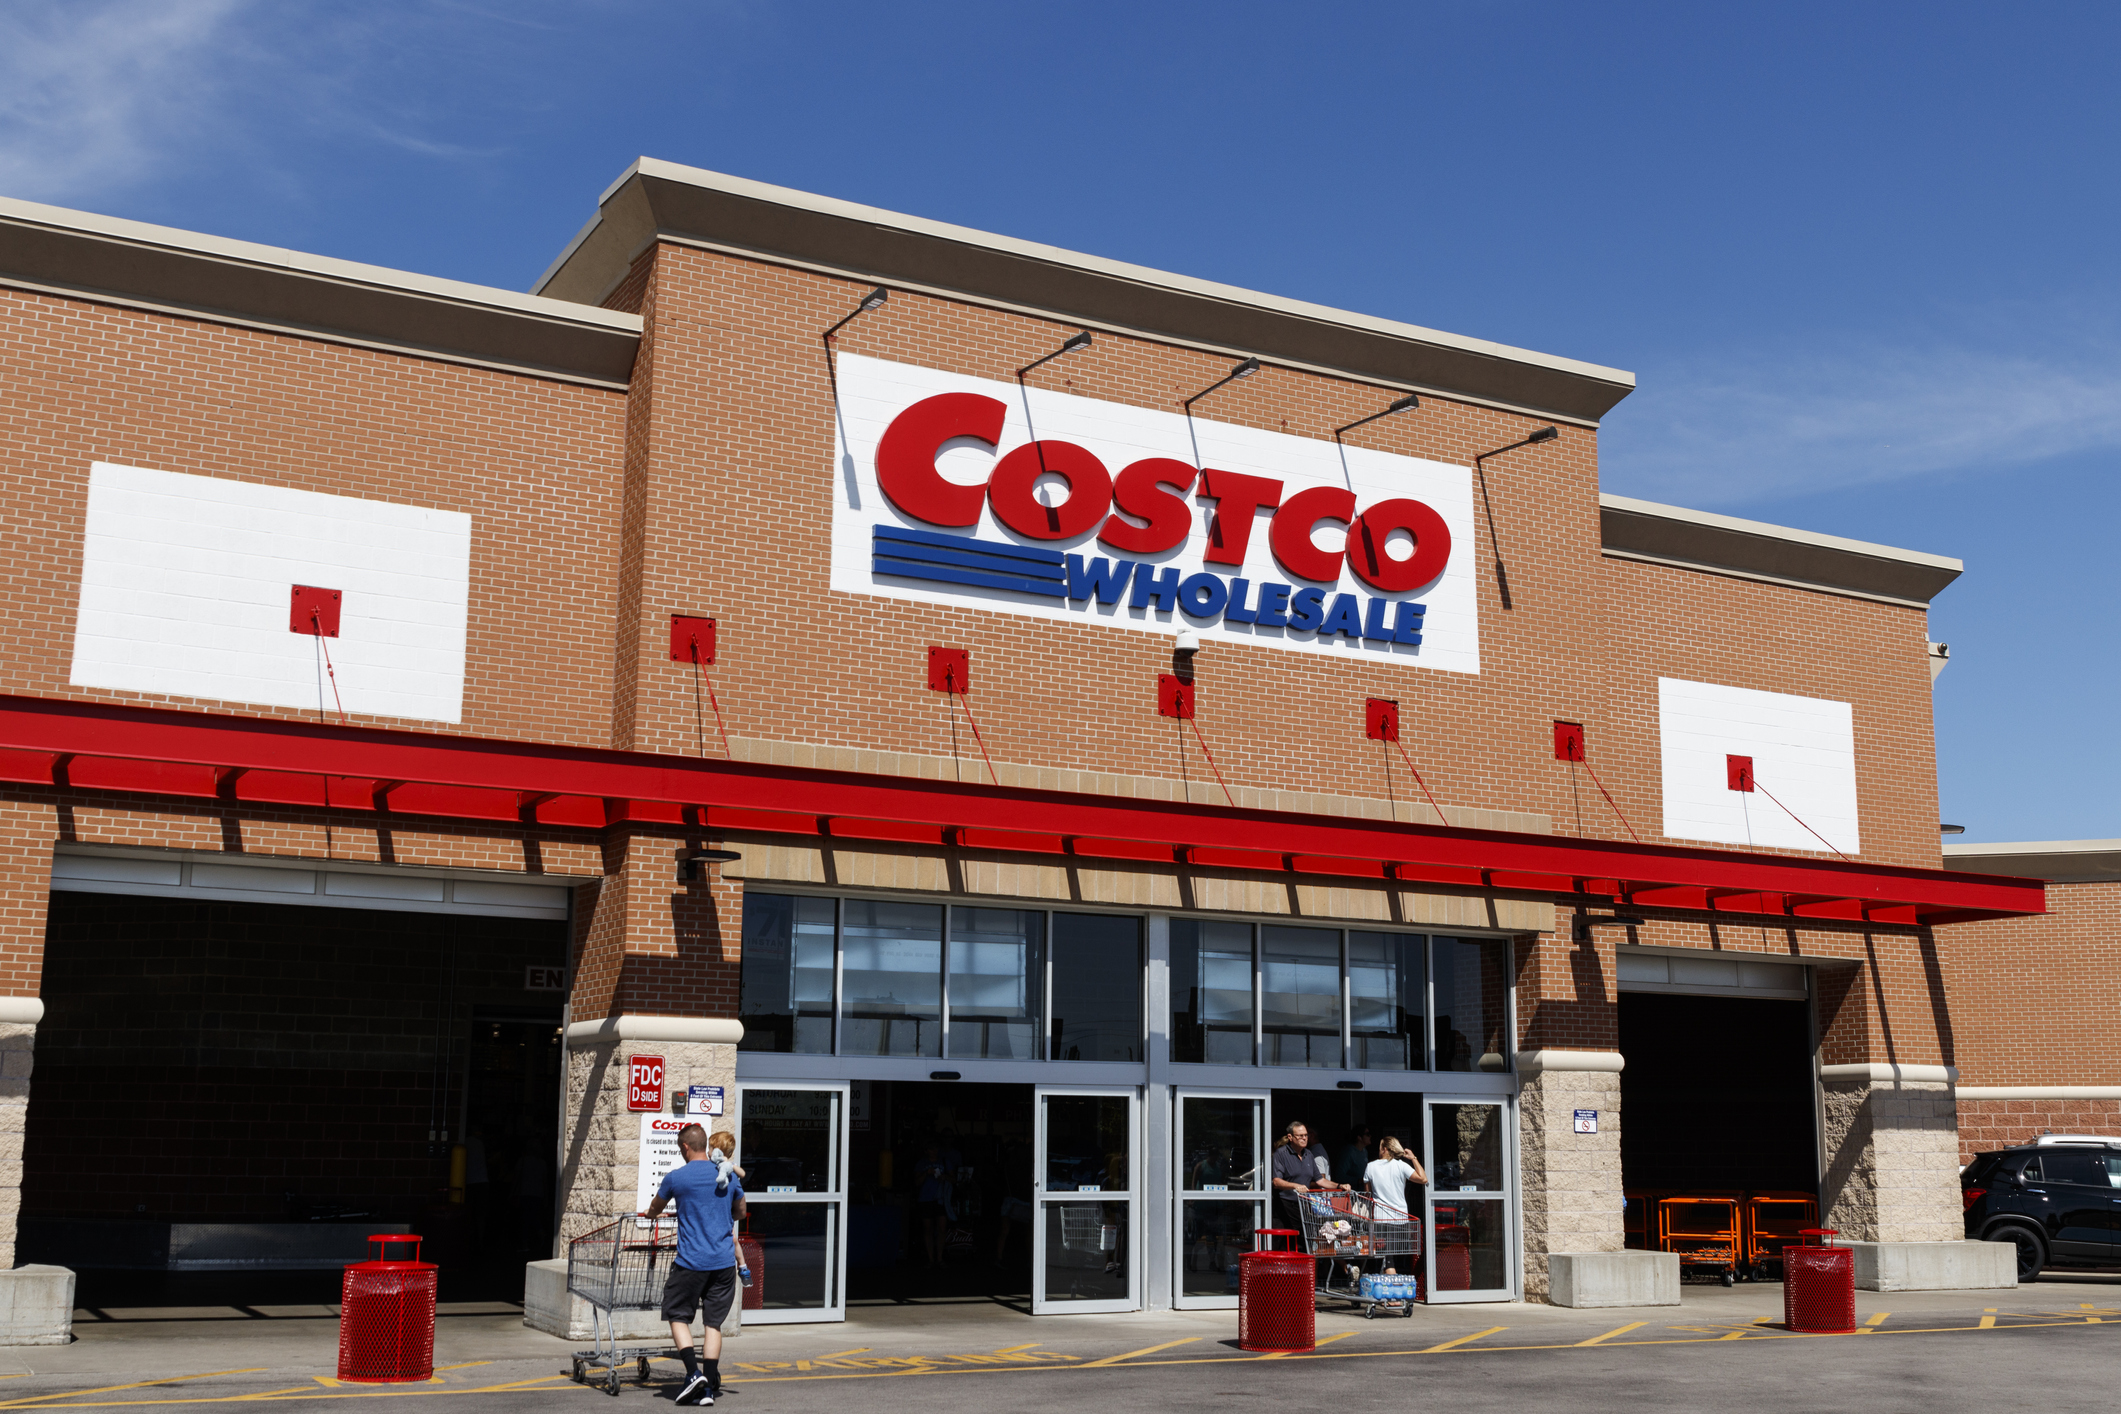 Costco Customers Are Running Out of Time to Save Their Photos & Claim 51% off Shutterfly Orders